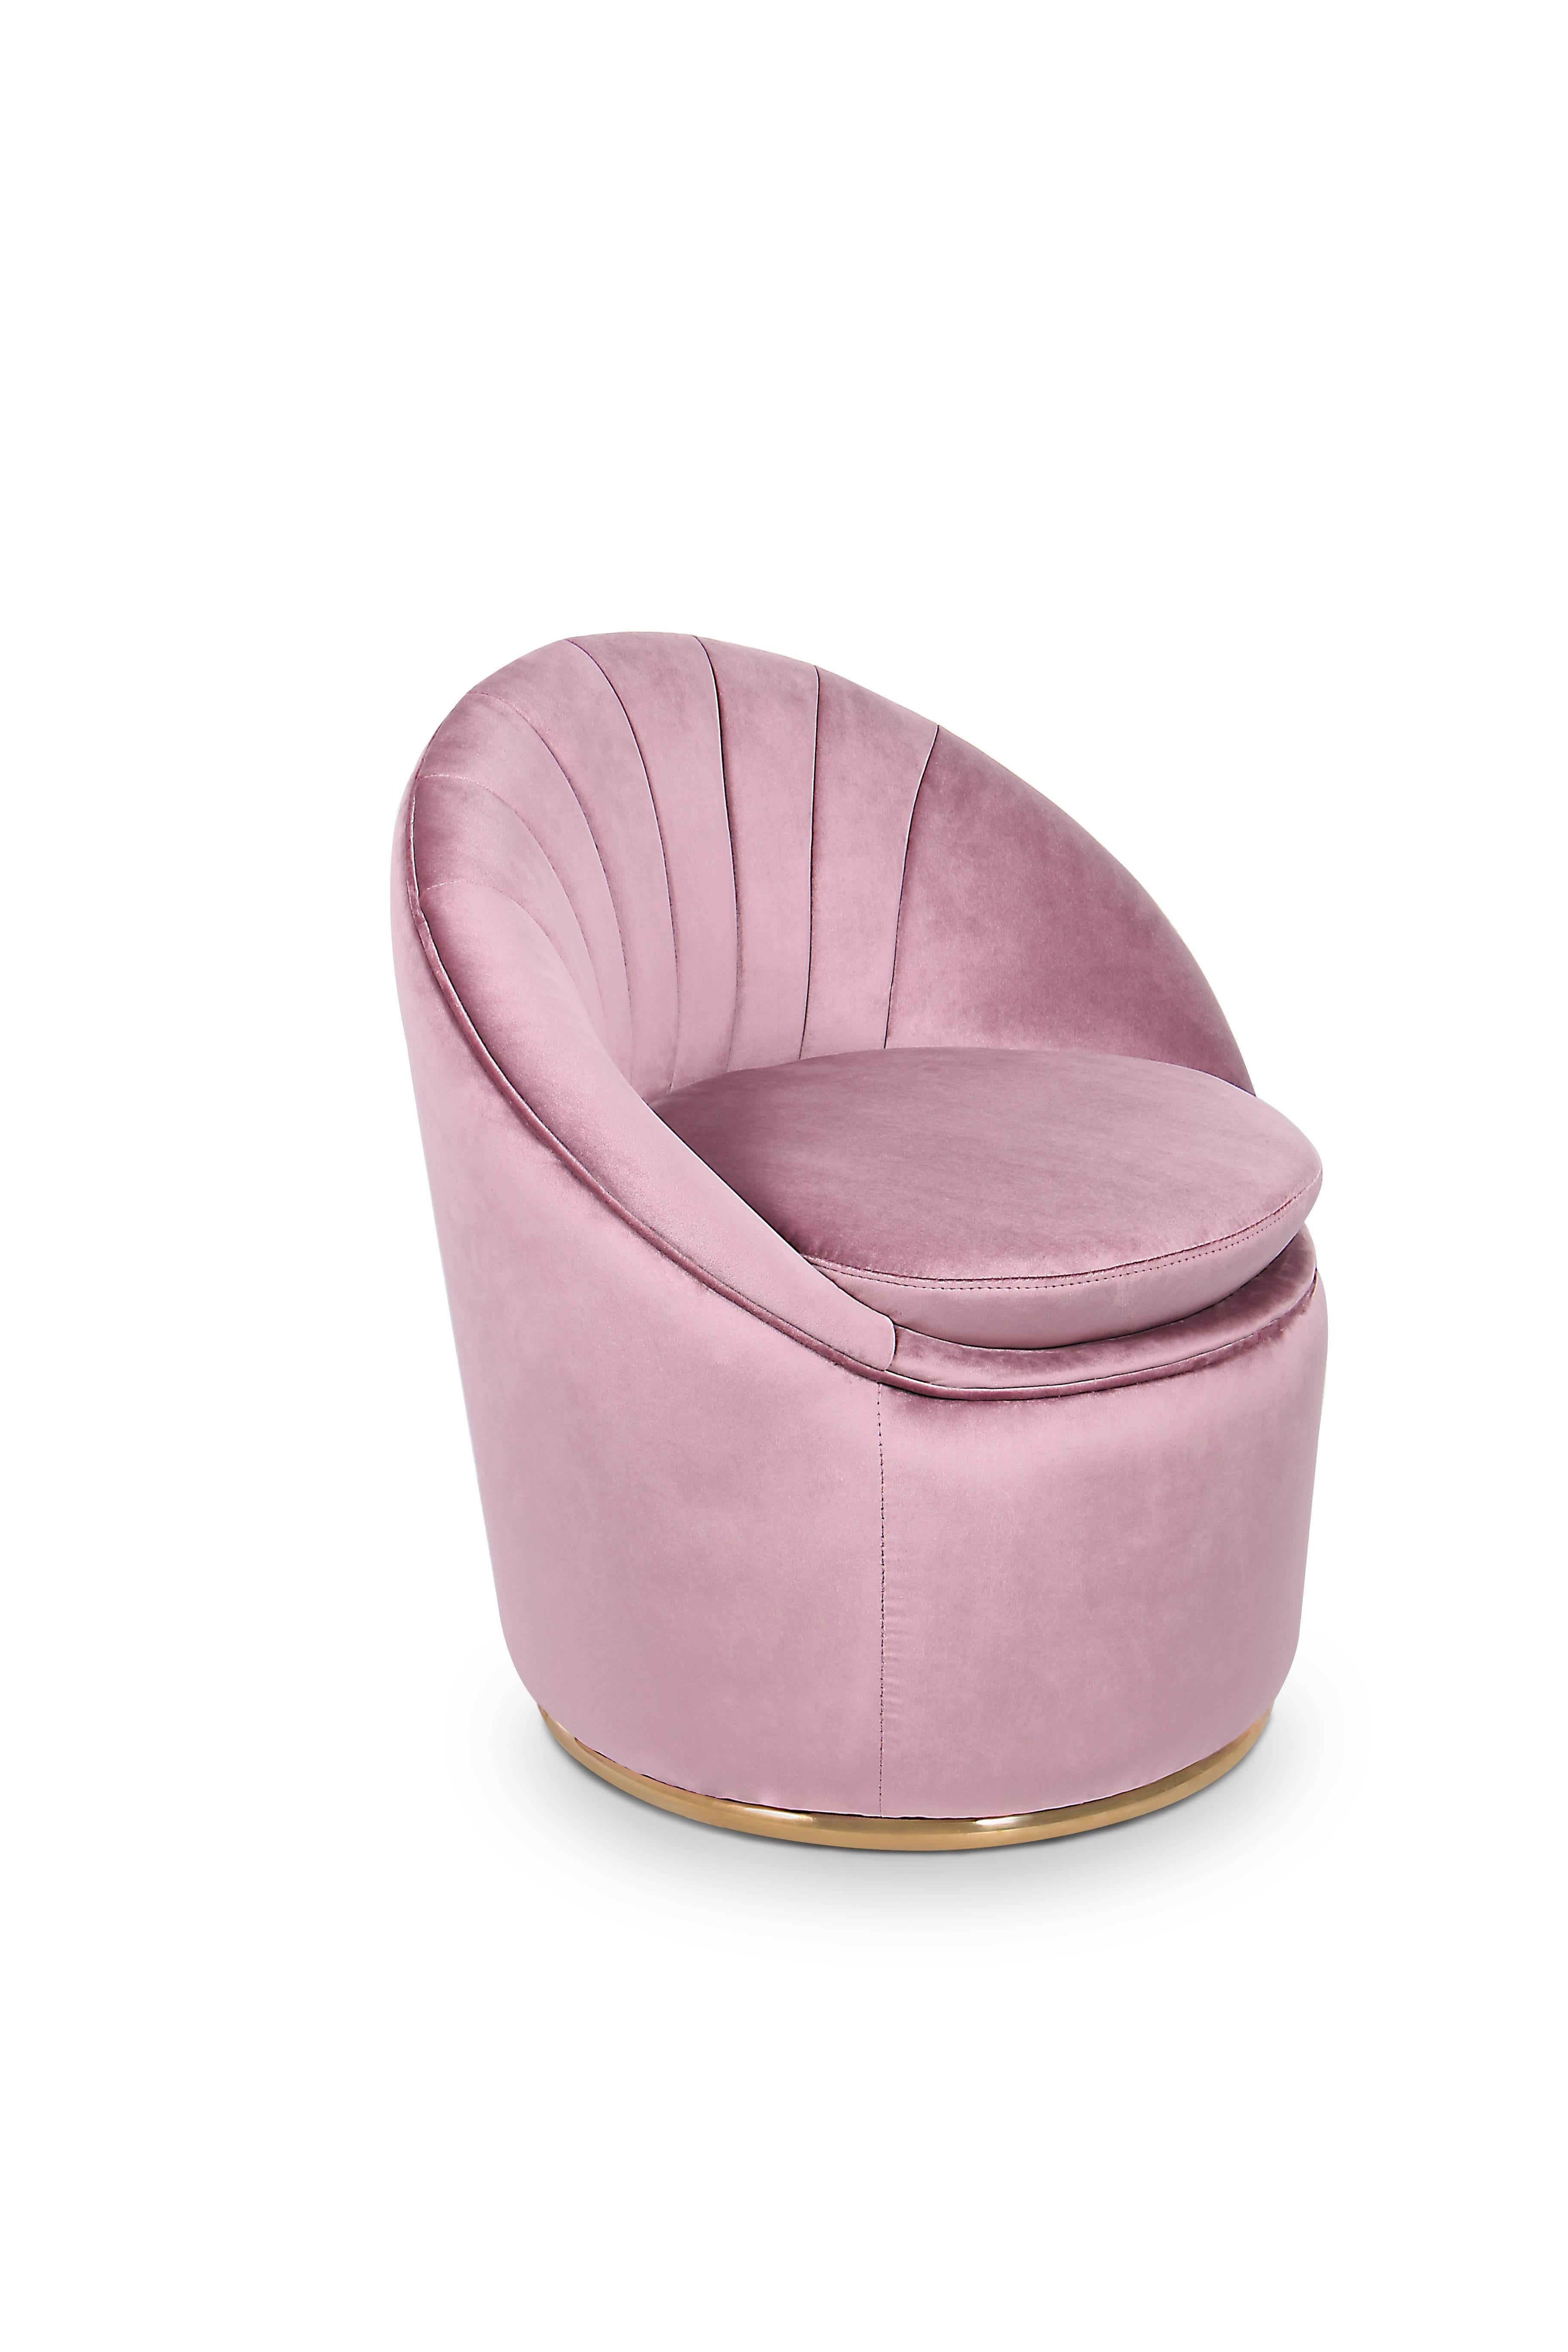 Inspired by the seductive movements of the iconic movie star, our designers put together an elegant and chic retro piece of furniture inspired in 1960s legacy. The lean details on this chair convey a more feminine and classy look, like the brass